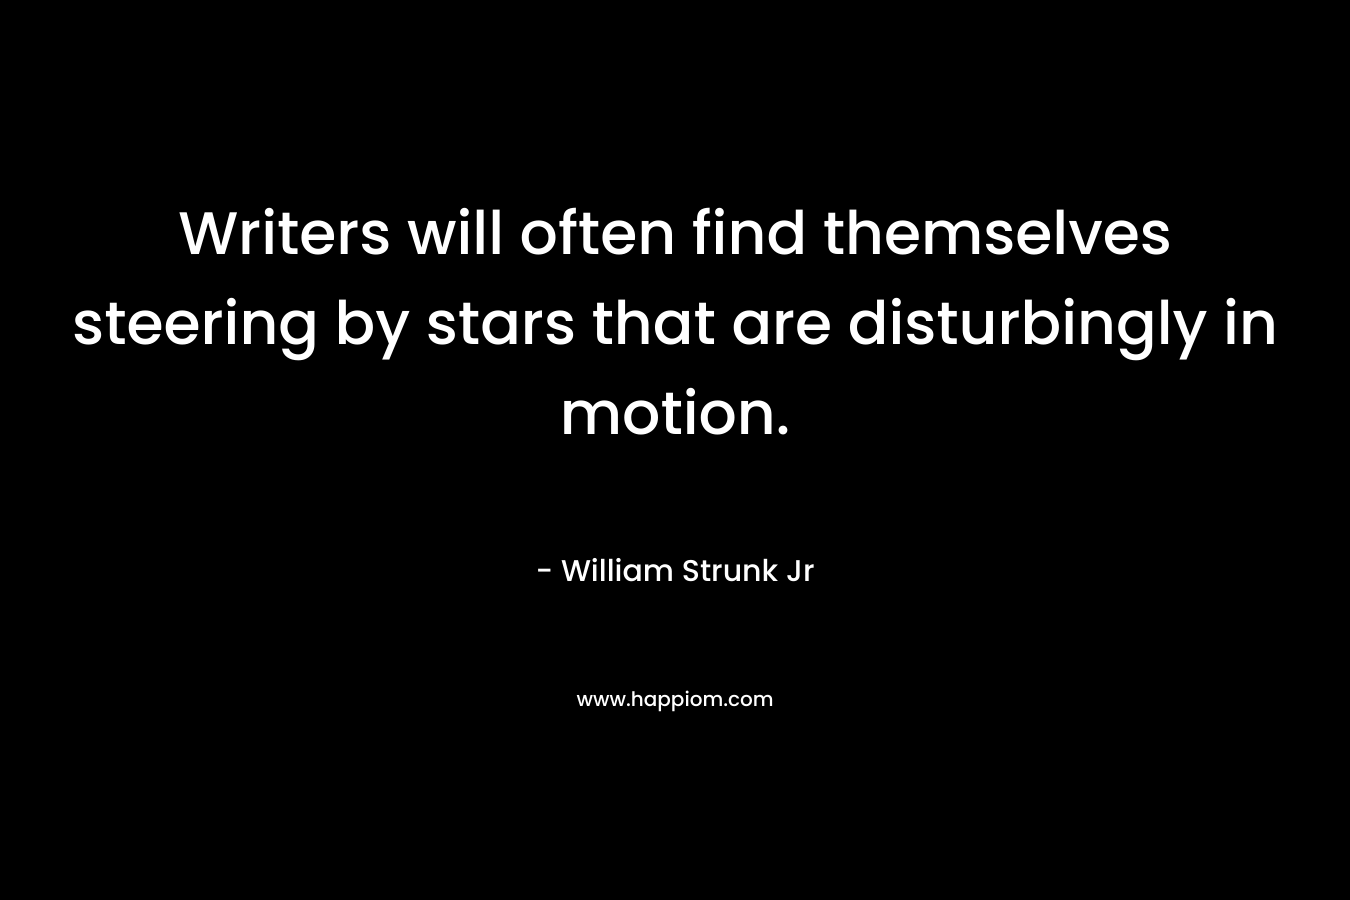 Writers will often find themselves steering by stars that are disturbingly in motion. – William Strunk Jr